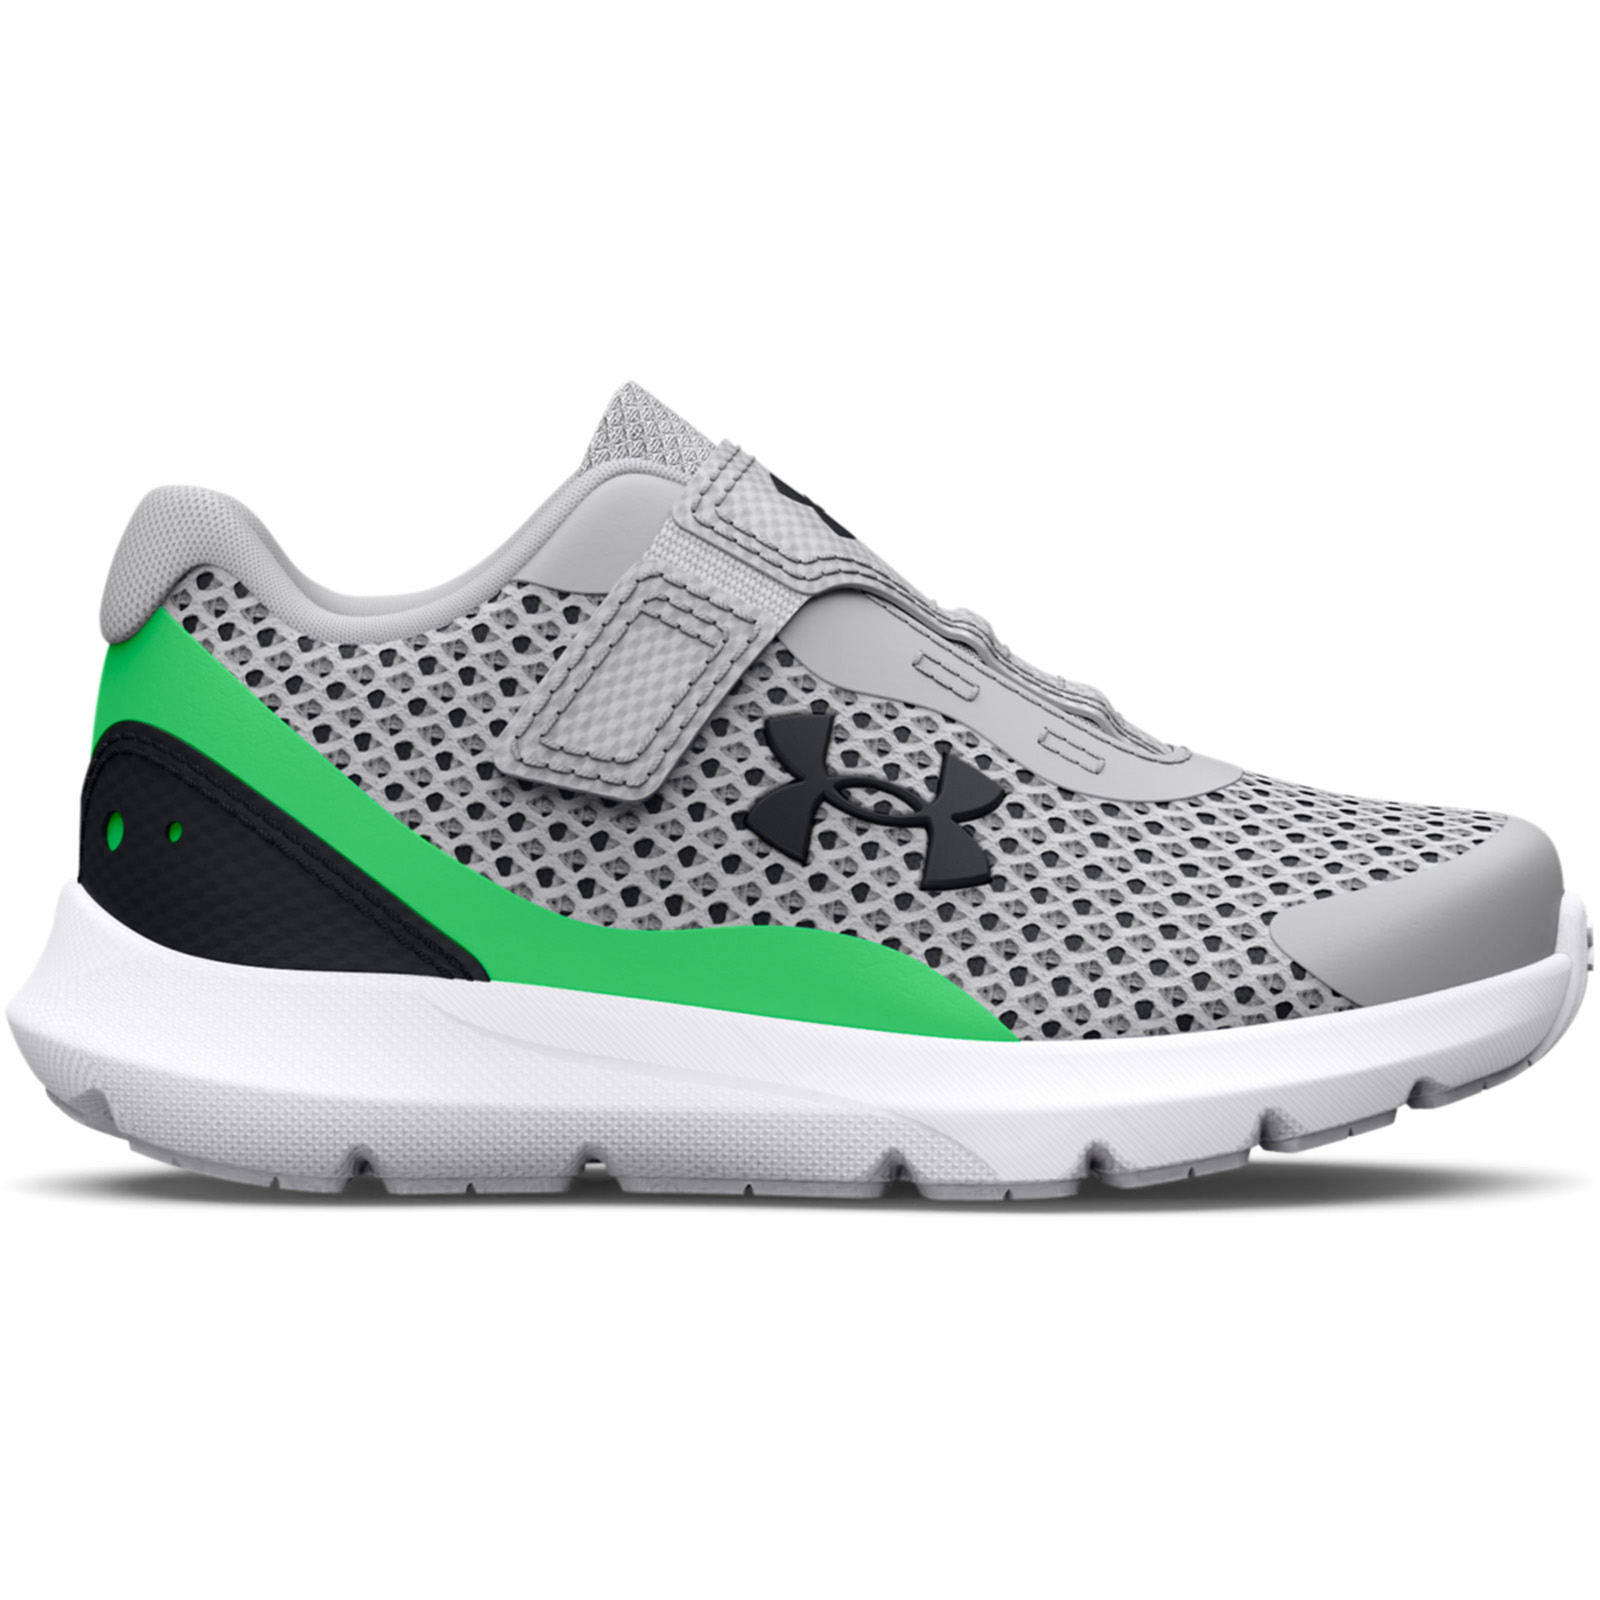 Under Armour - 3024991 Boys' Infant UA Surge 3 AC Running Shoes - 102/9292 Παιδικά > Παπούτσια > Αθλητικά > Παπούτσι Low Cut